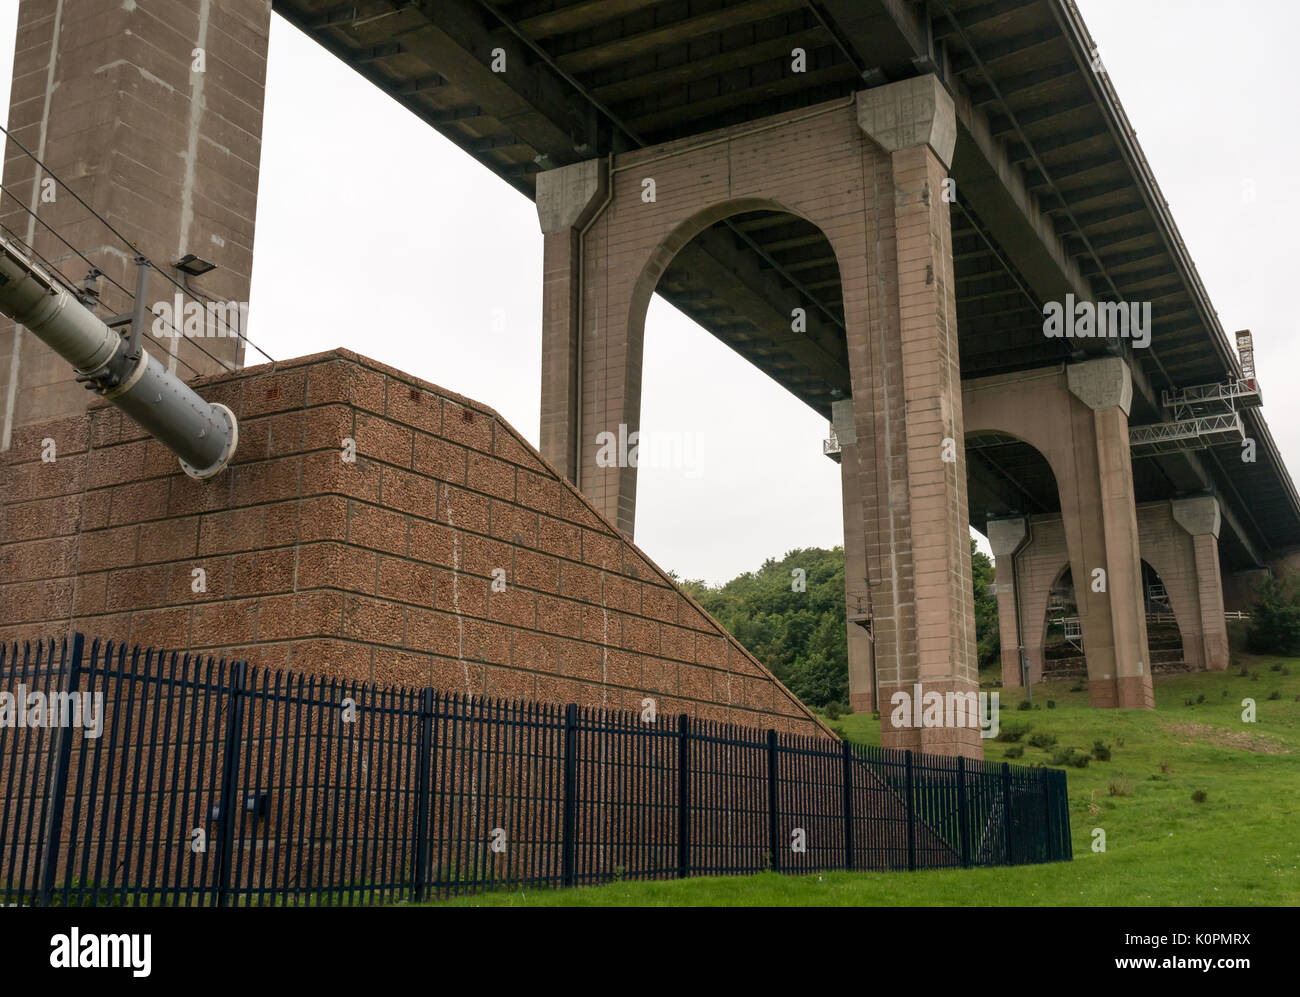 View from under Forth Road Bridge with arched concrete bridge struts and cable, North Queensferry, Fife, Scotland, UK Stock Photo